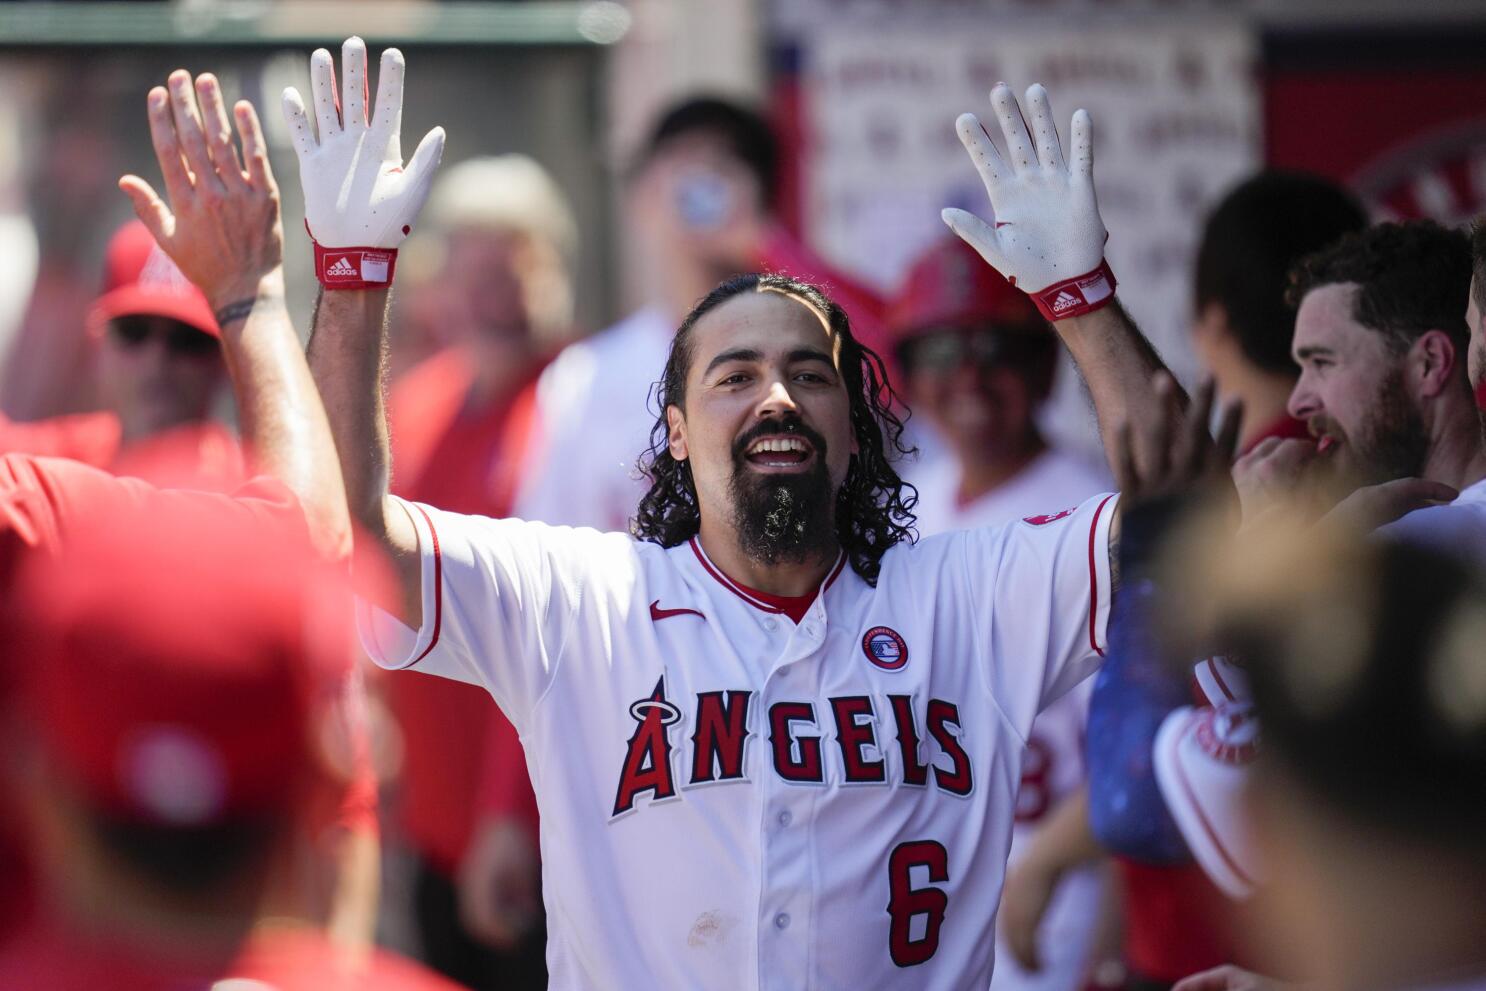 Anthony Rendon injury update: Angels infielder says he fractured